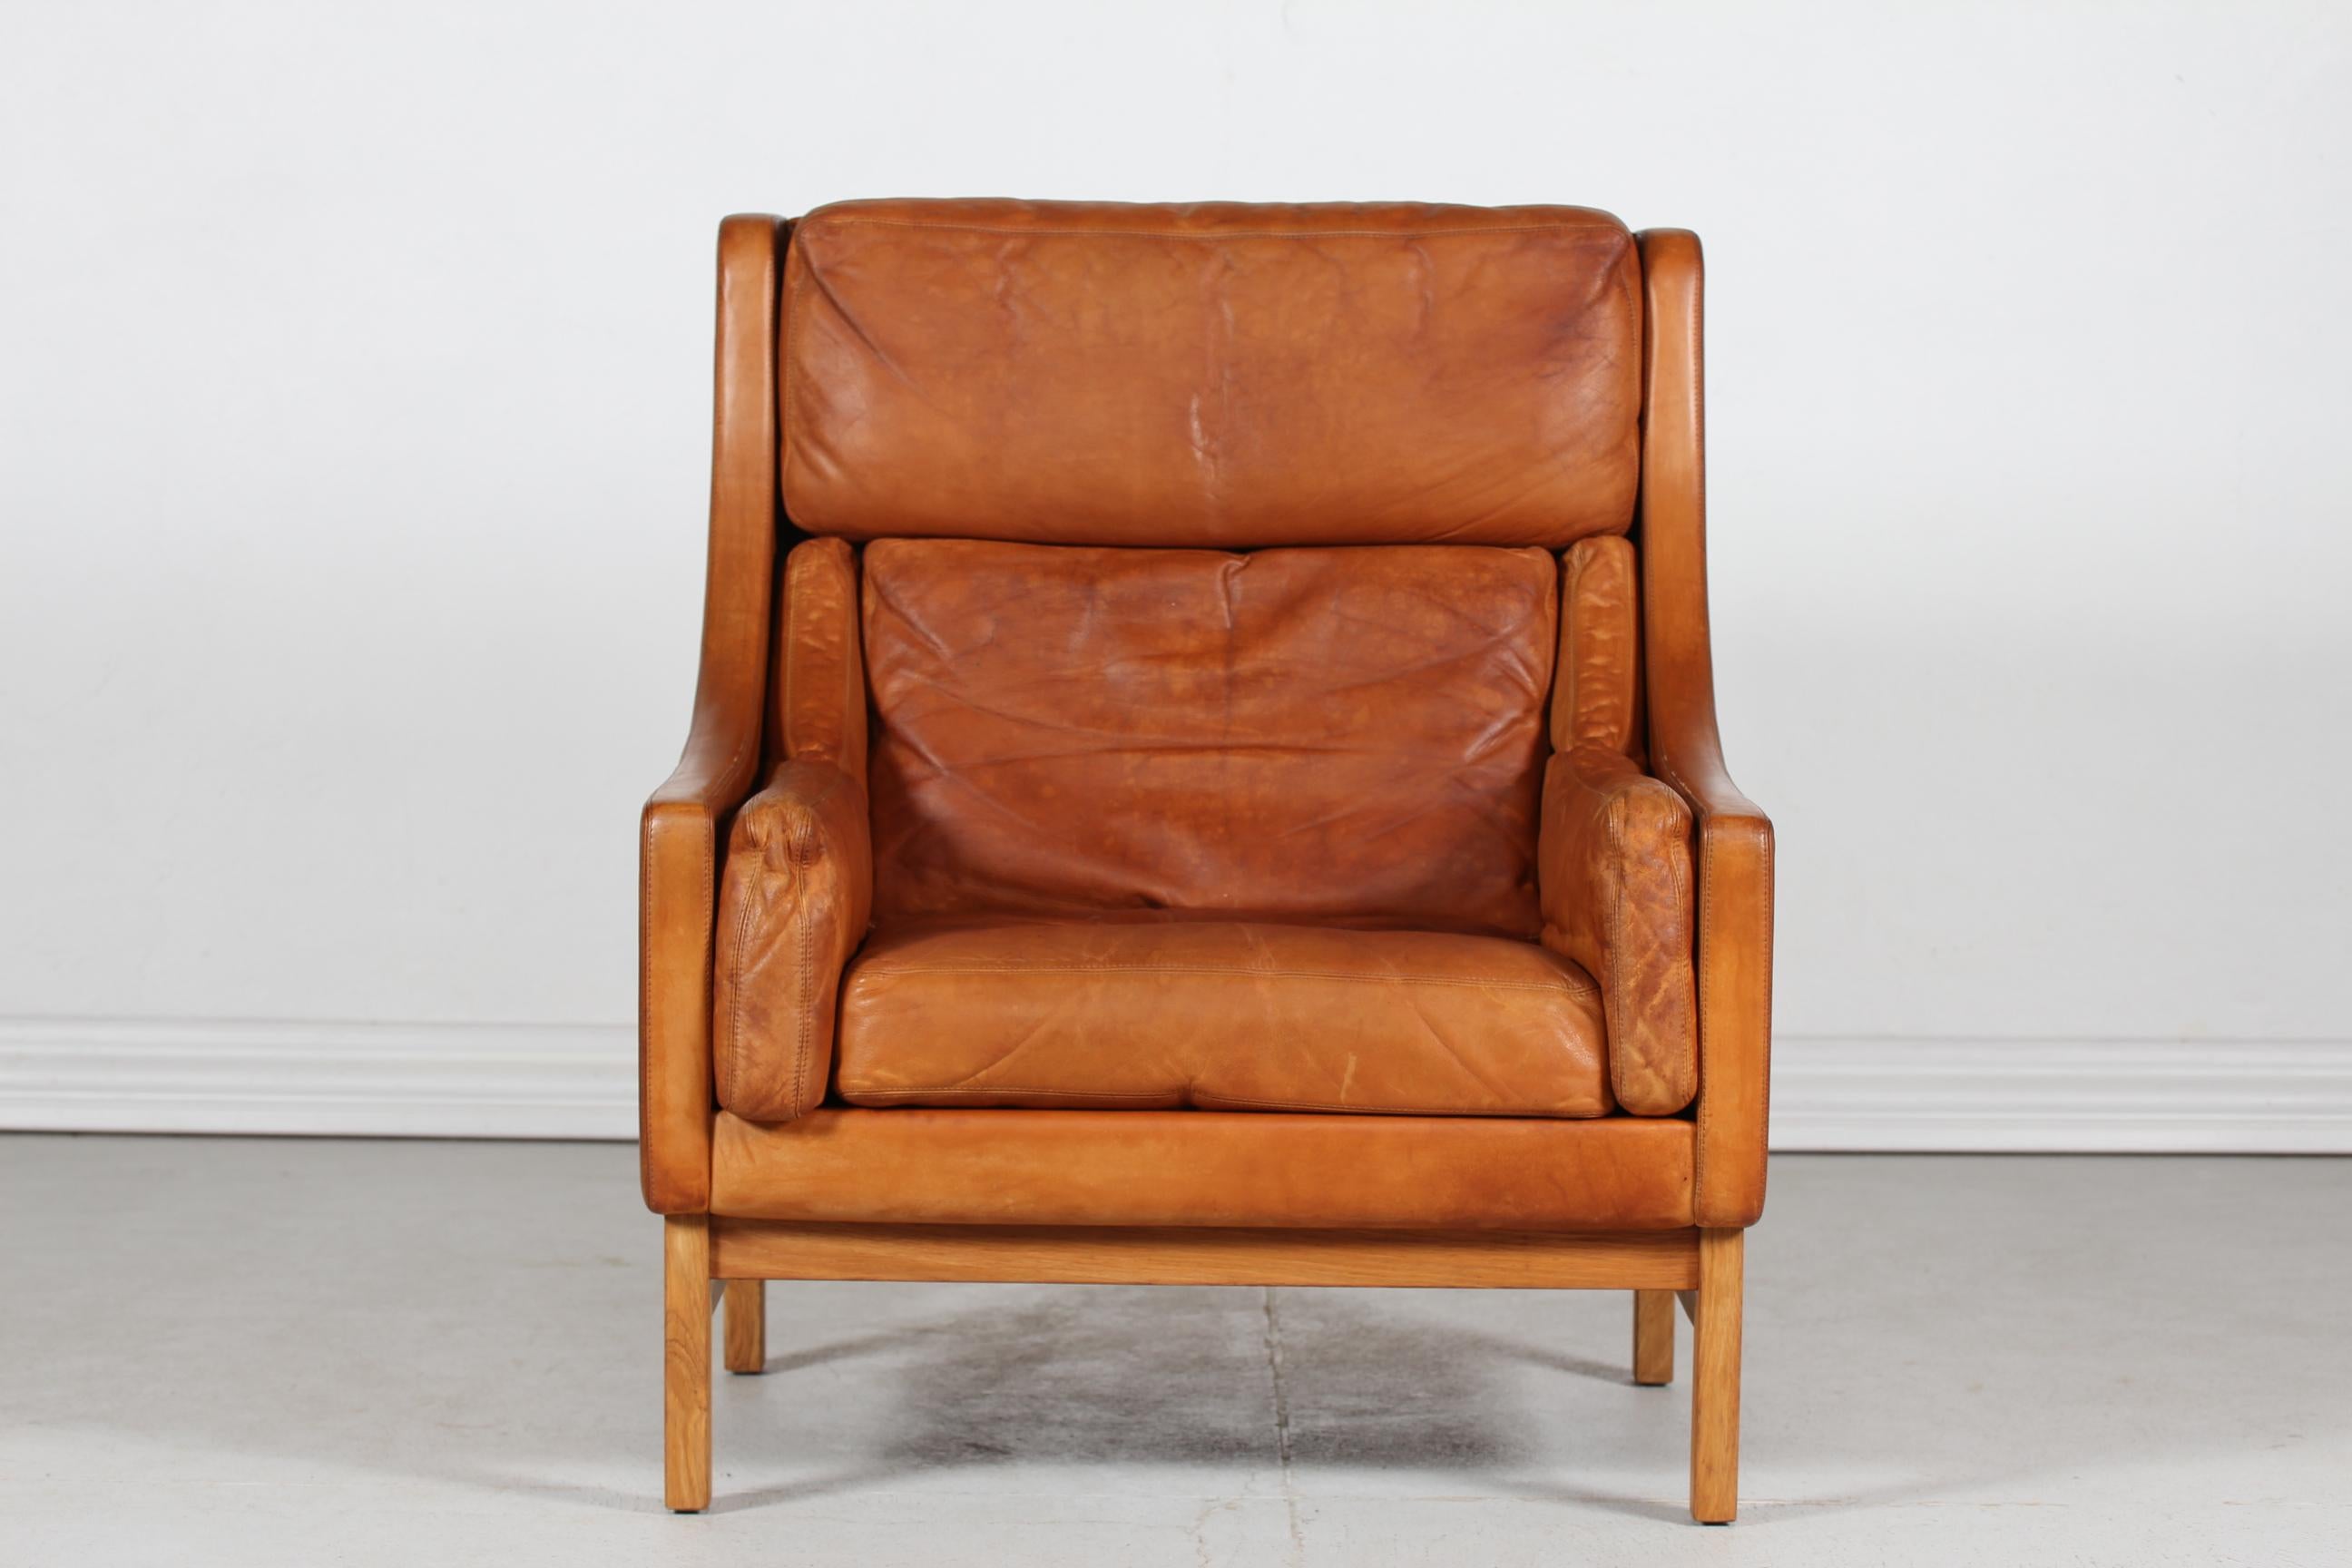 Lounge chair designed by Danish Erik Jørgensen and manufactured at Erik Jørgensen´s own furniturefactory in Denmark in the 1970s.
In the style of Poul Volther

The chair is upholstered with cognac colored patinated leather with great patina 
on